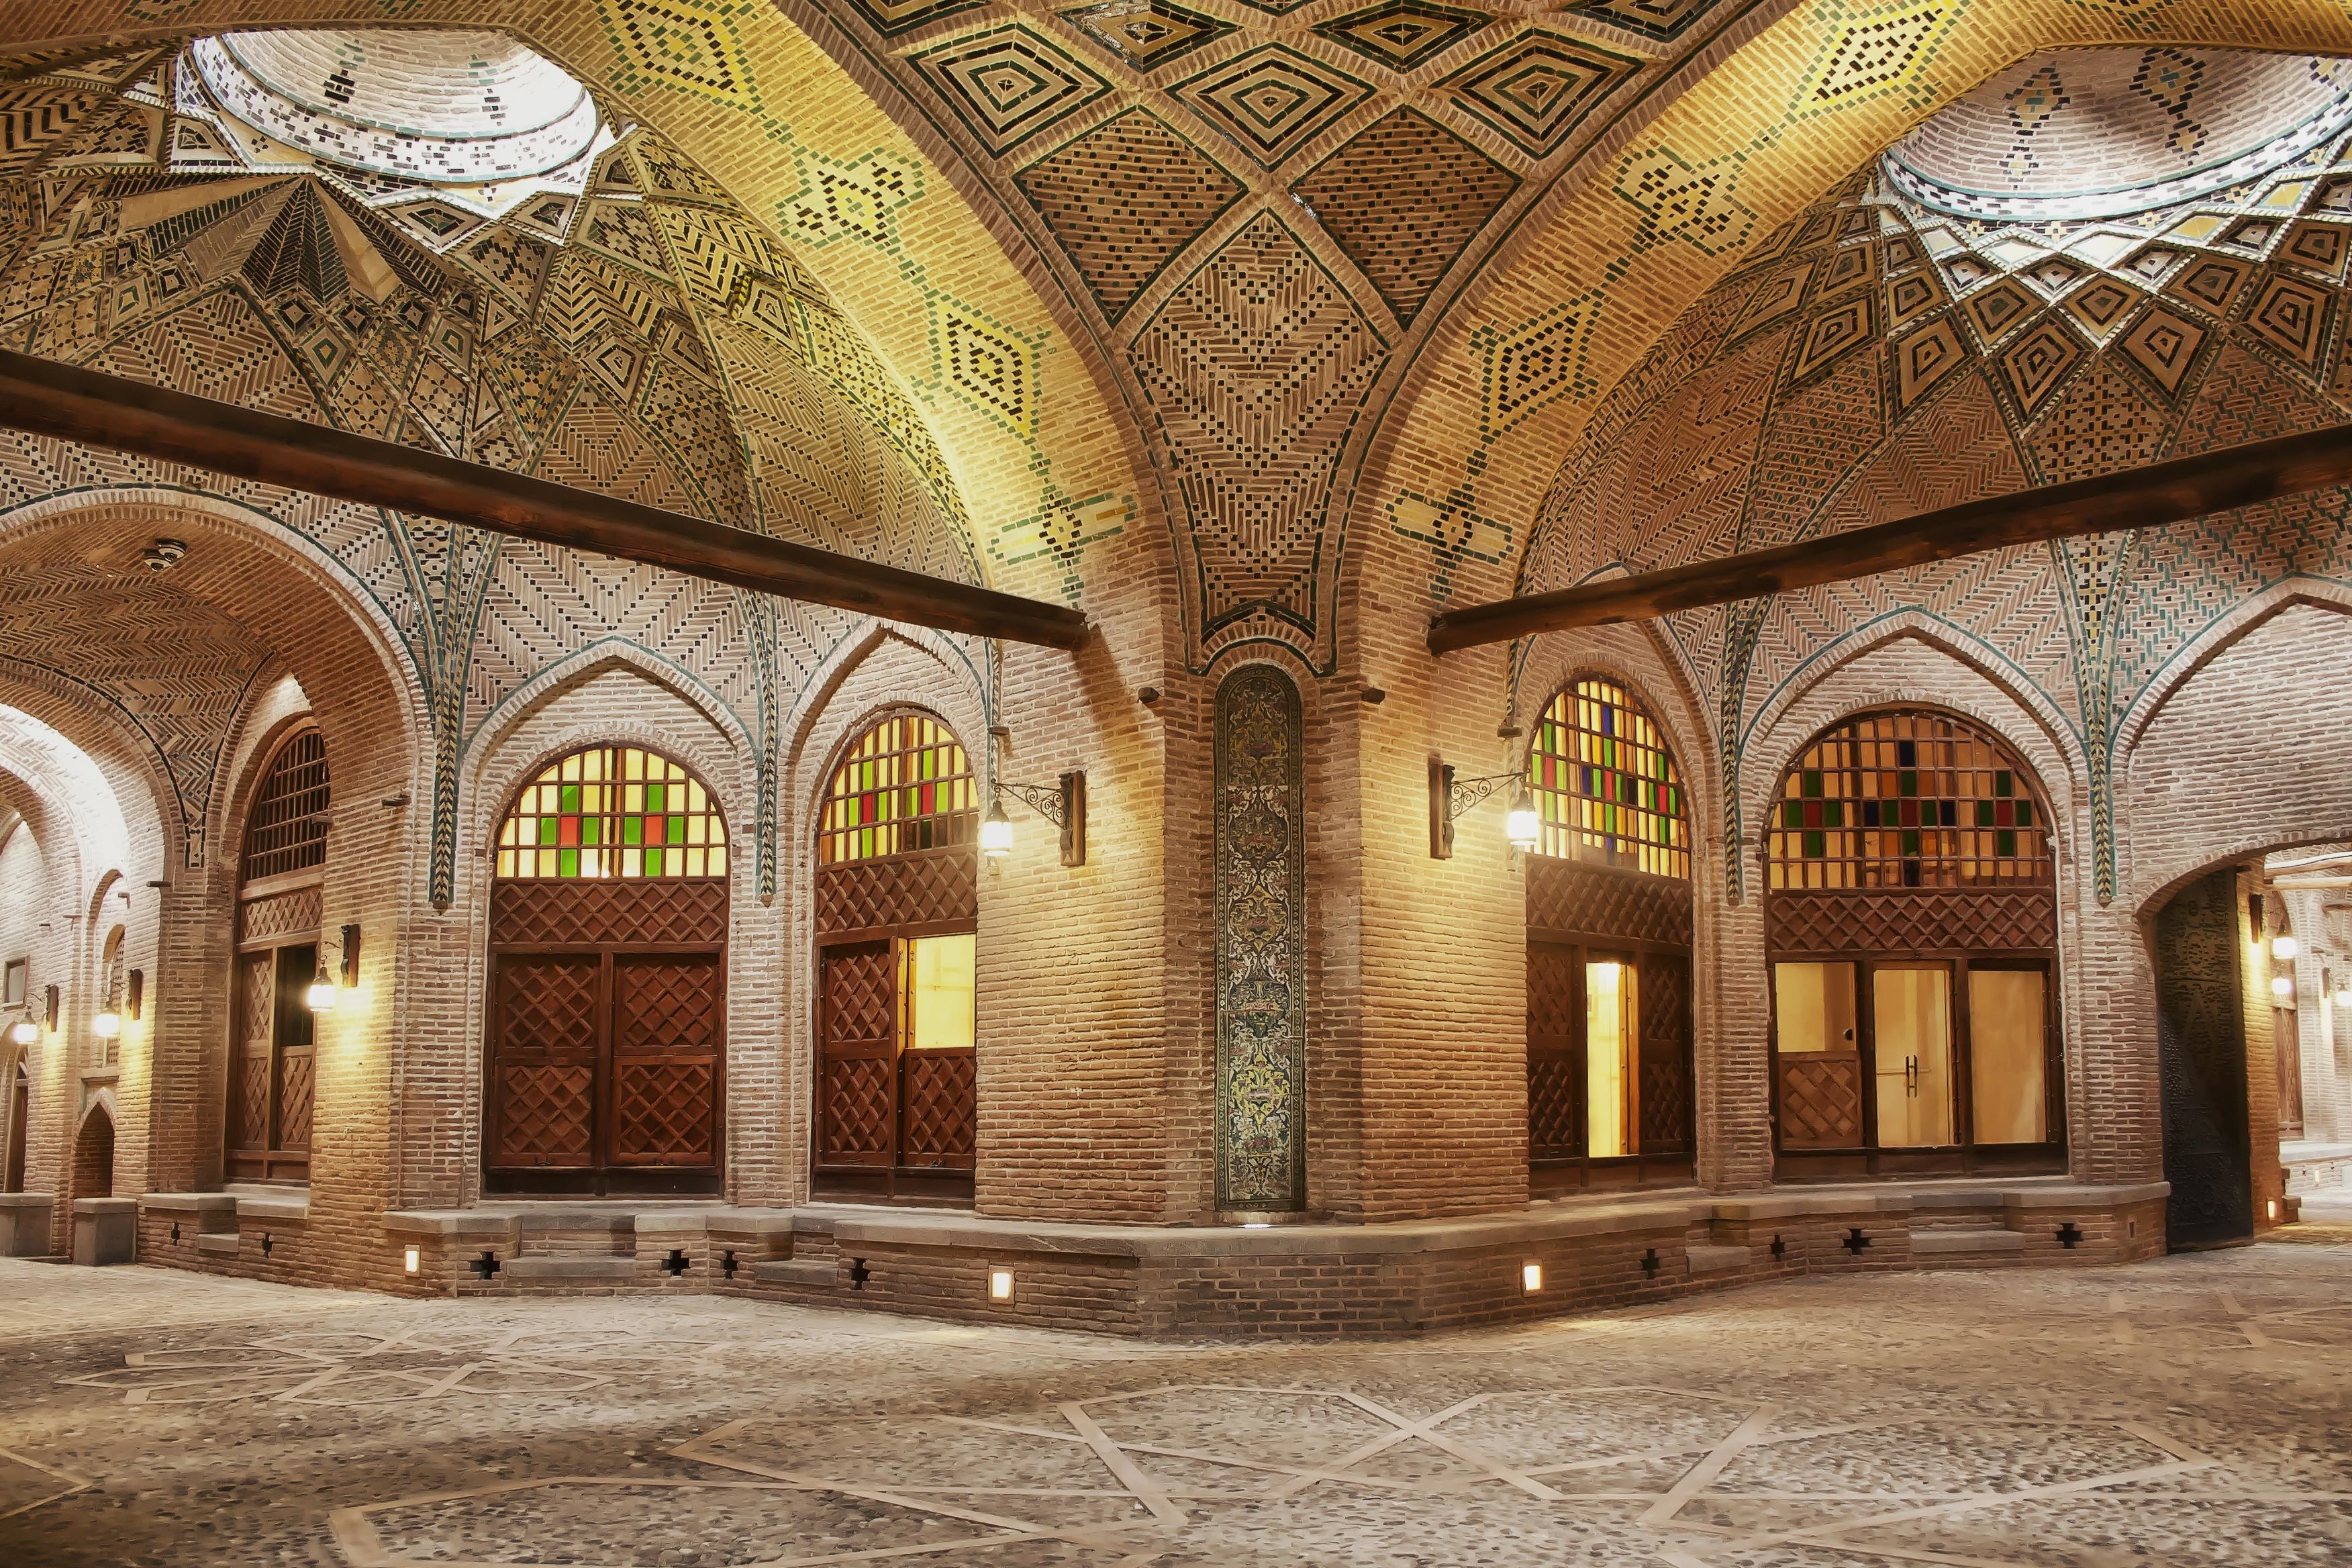 The Qazvin bazaar with its interesting and old architecture is one of the most spectacular places in Qazvin